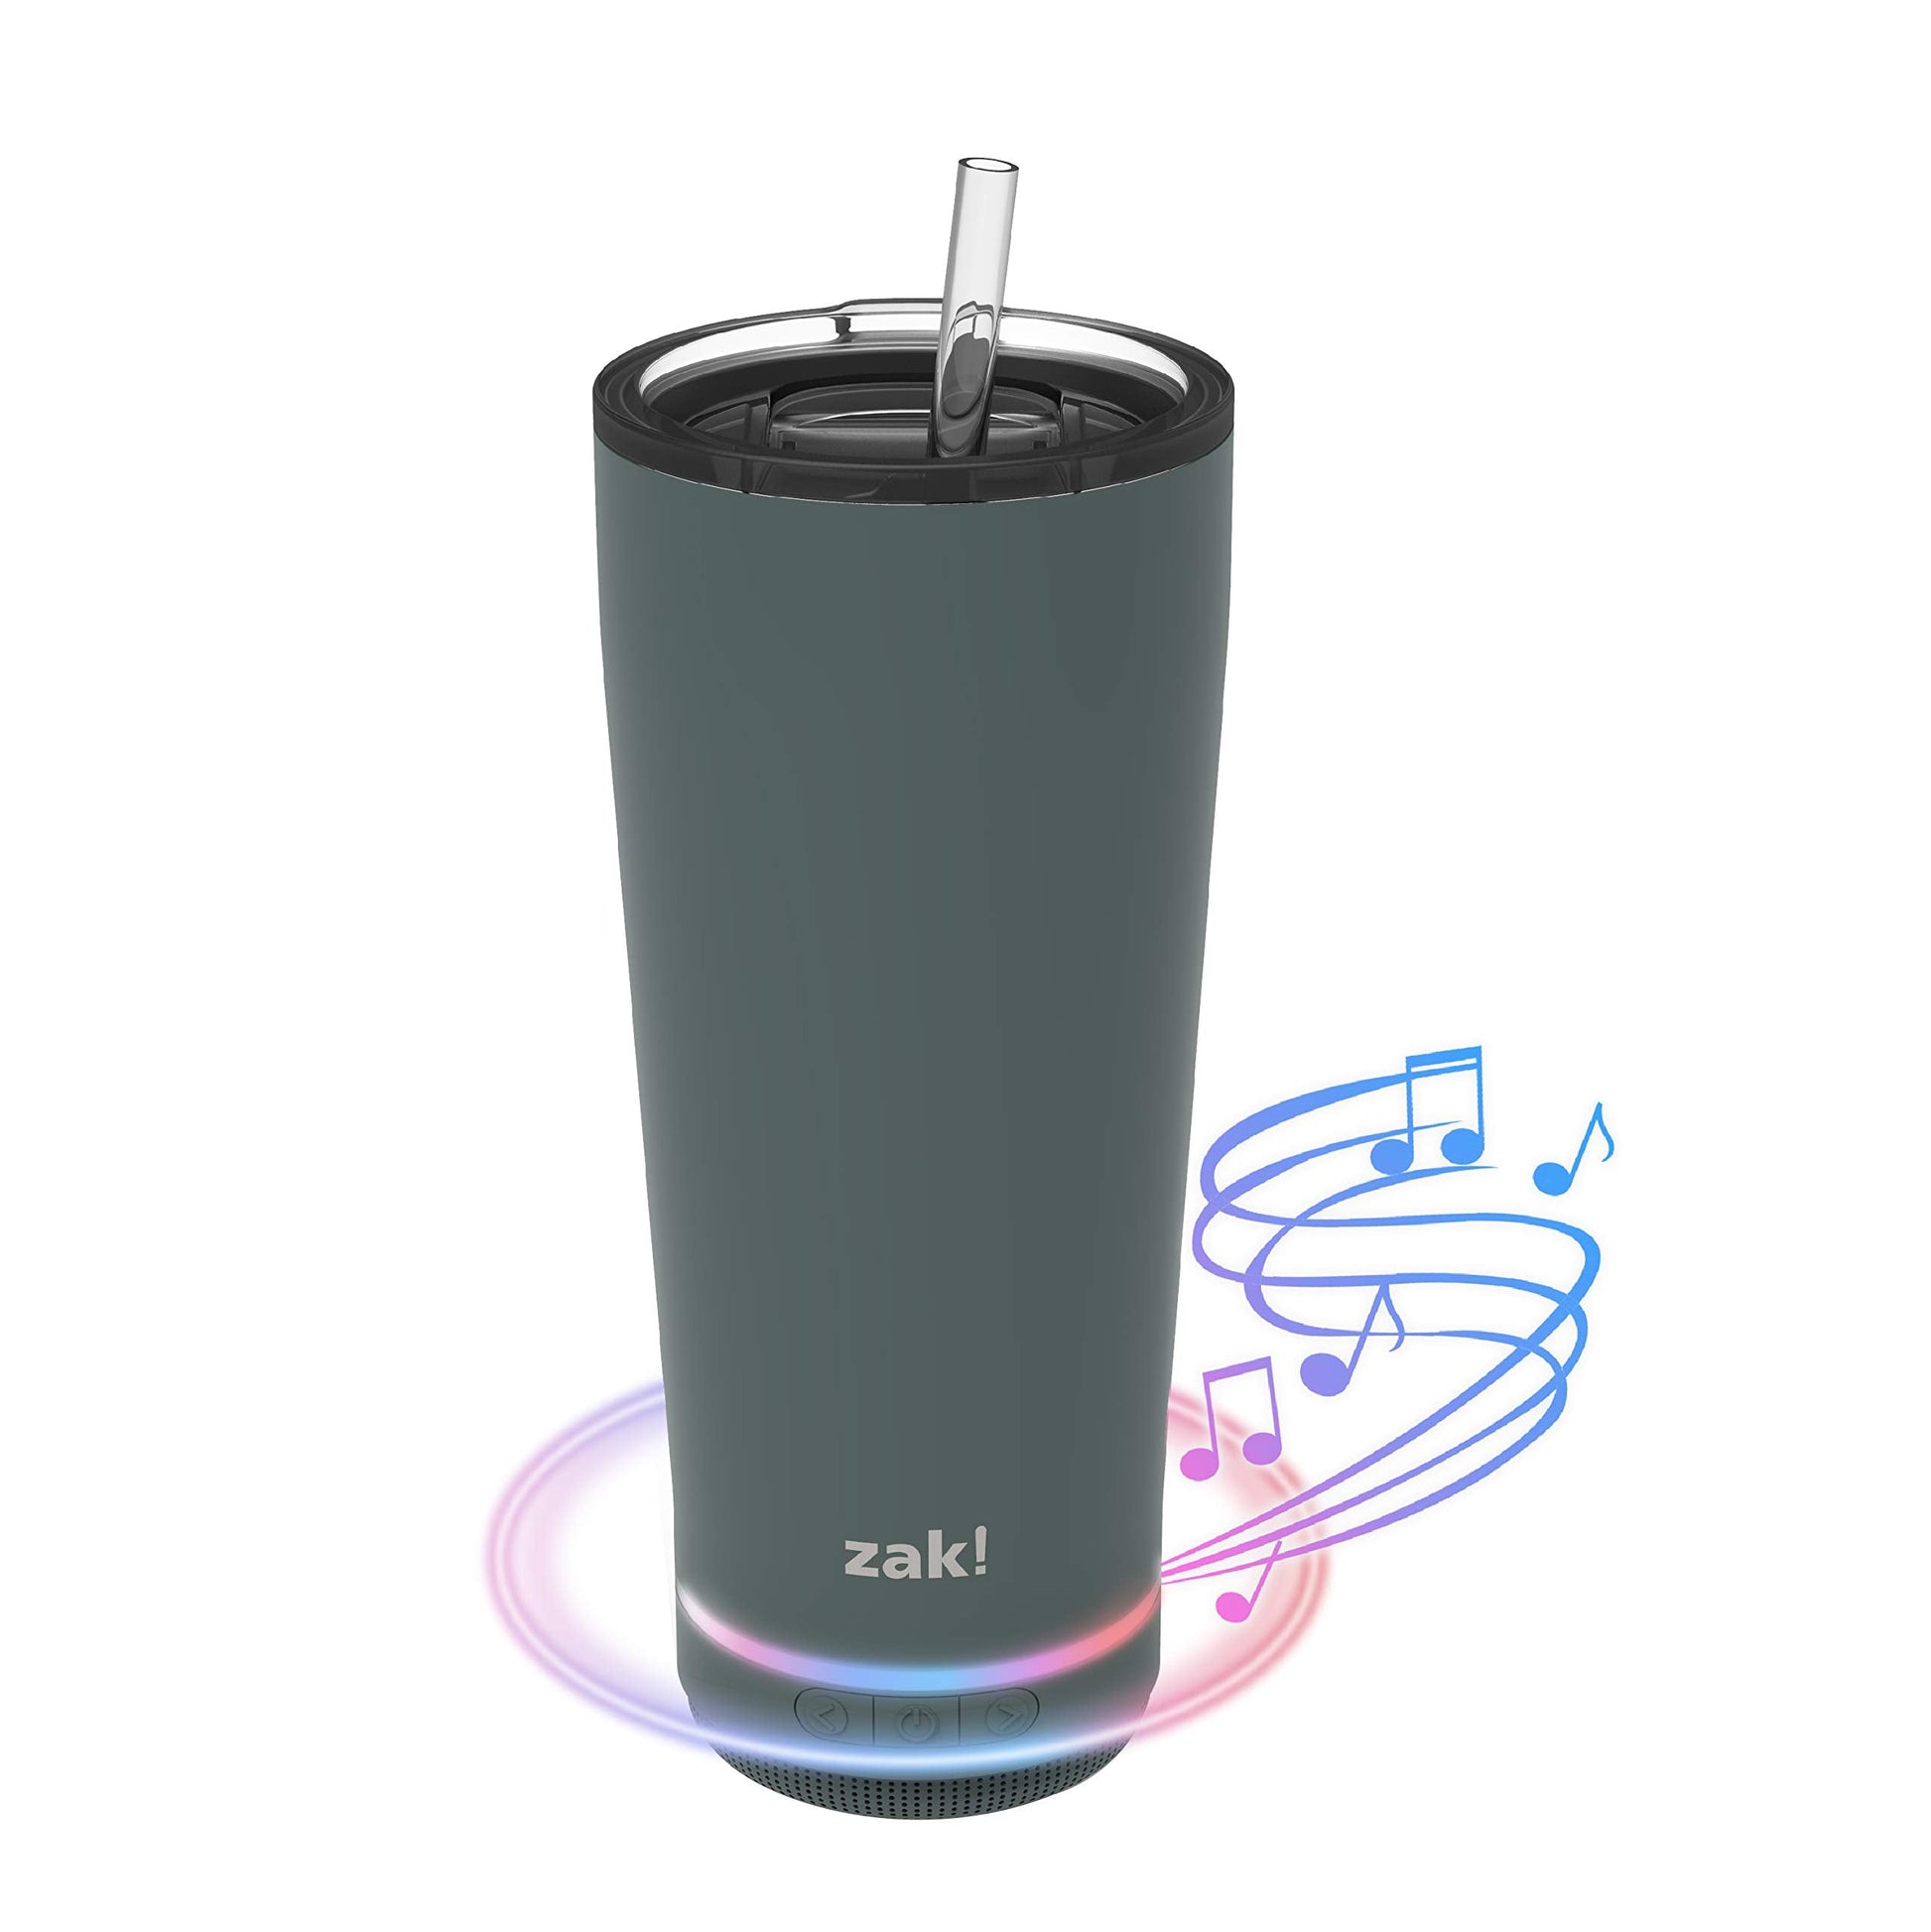 Zak Designs Zak! Play Bluetooth Tumbler with Straw and Wireless Speaker, Reusable Stainless Steel and Double-Wall Vacuum Insulation with 500mAh capacity and micro USB port - Home Decor Gifts and More